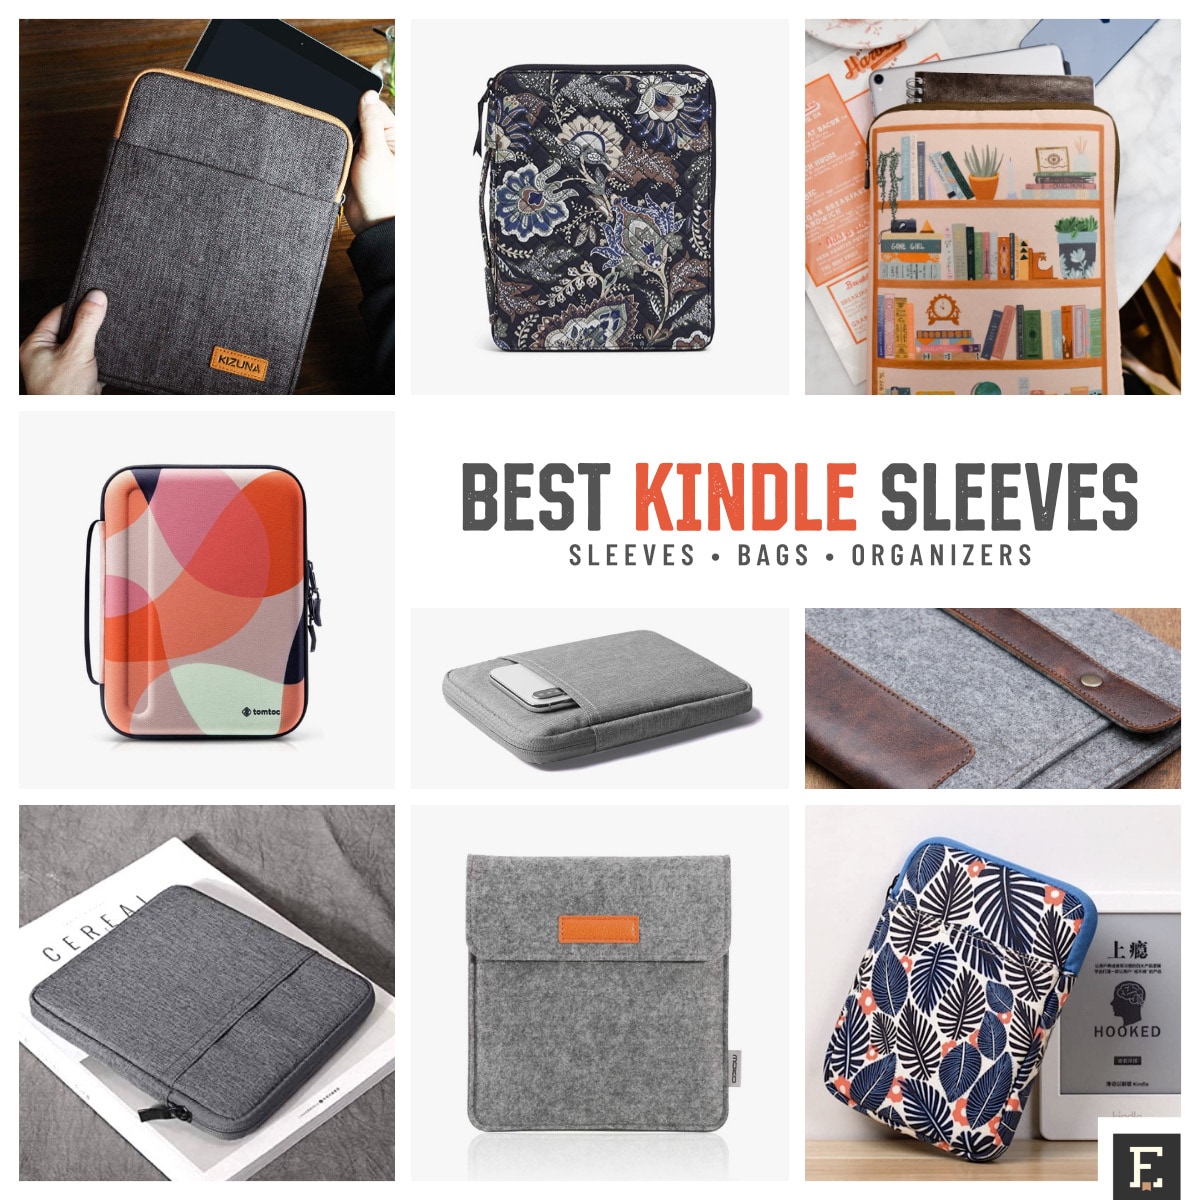 The best Kindle sleeves and bags